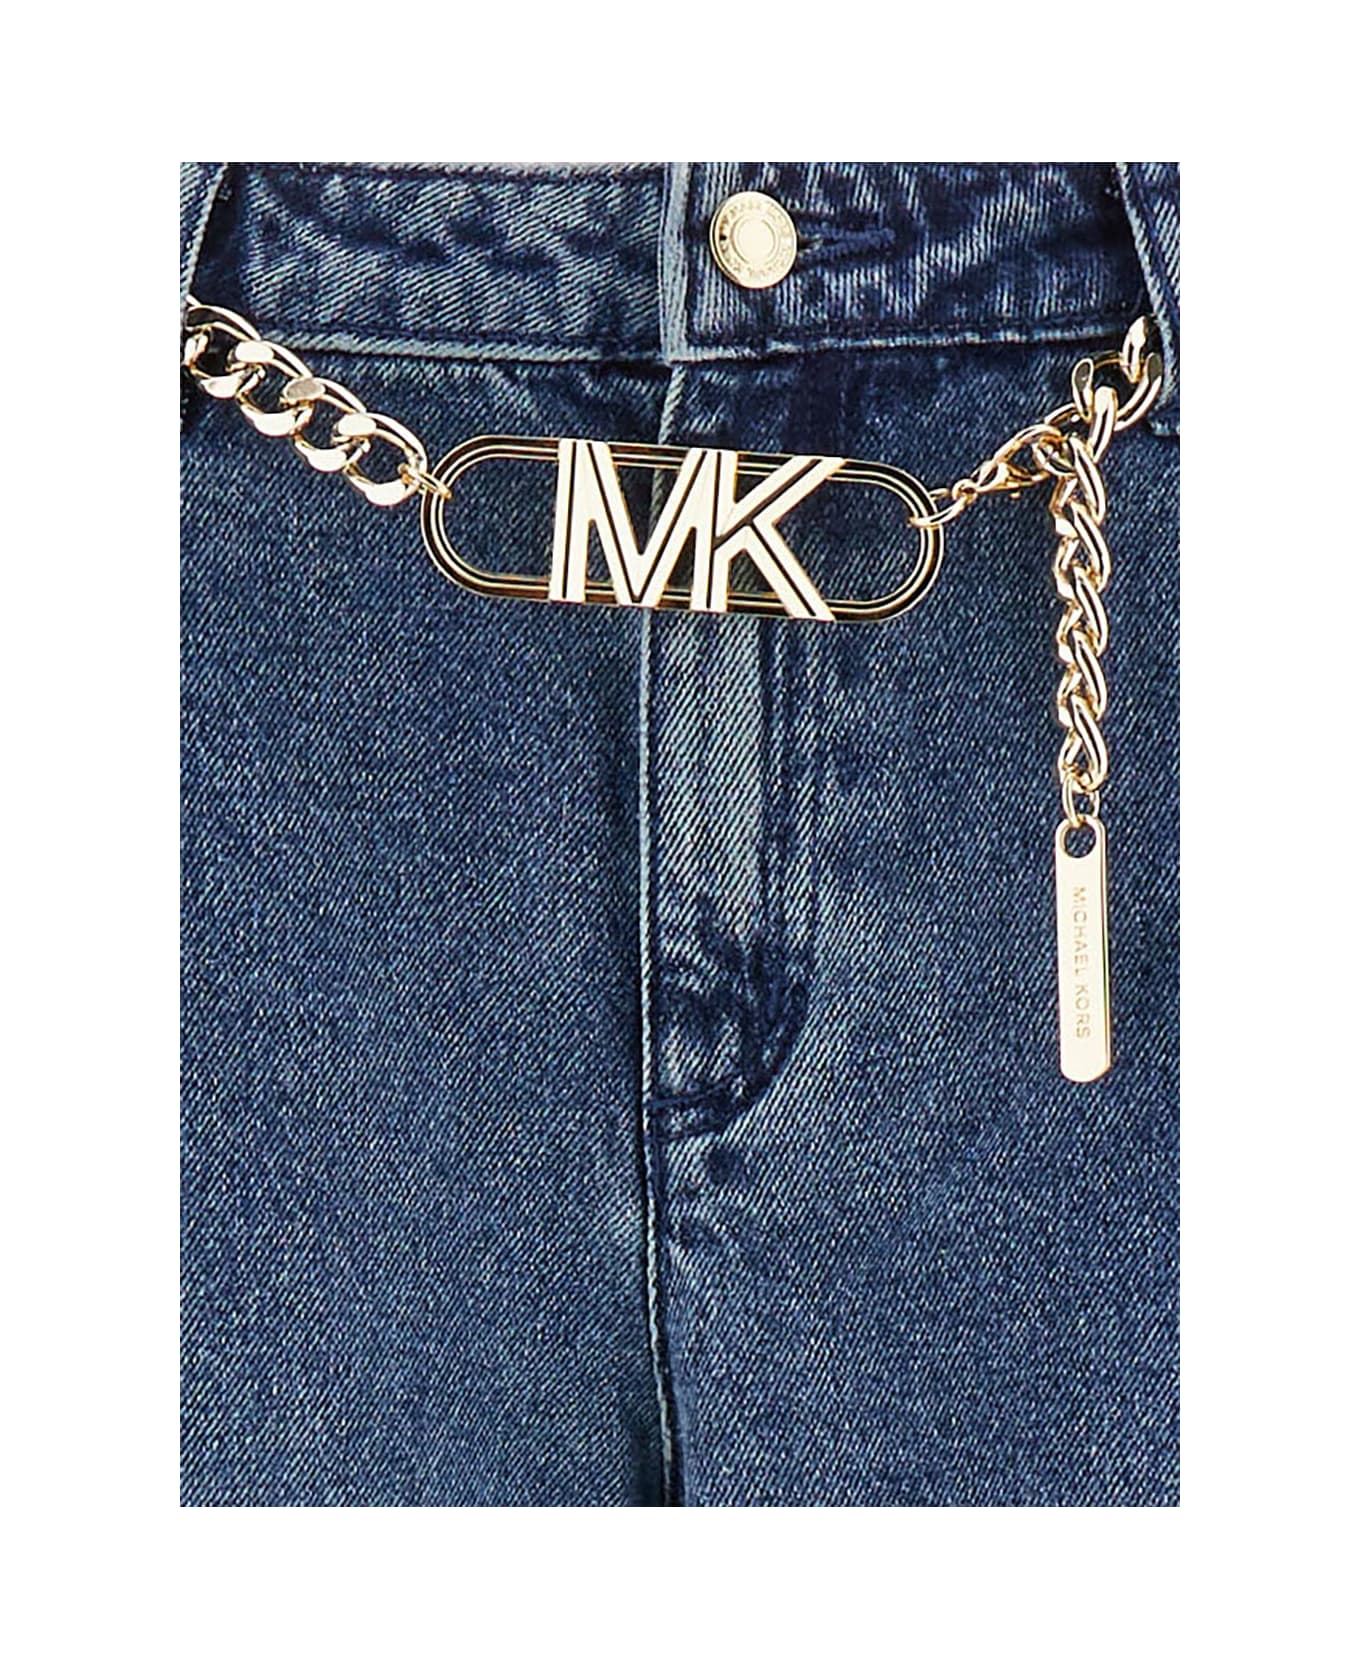 Michael Kors Collection Blue Flared Jeans With Chain Belt In Denim Woman - Duskbluewash デニム